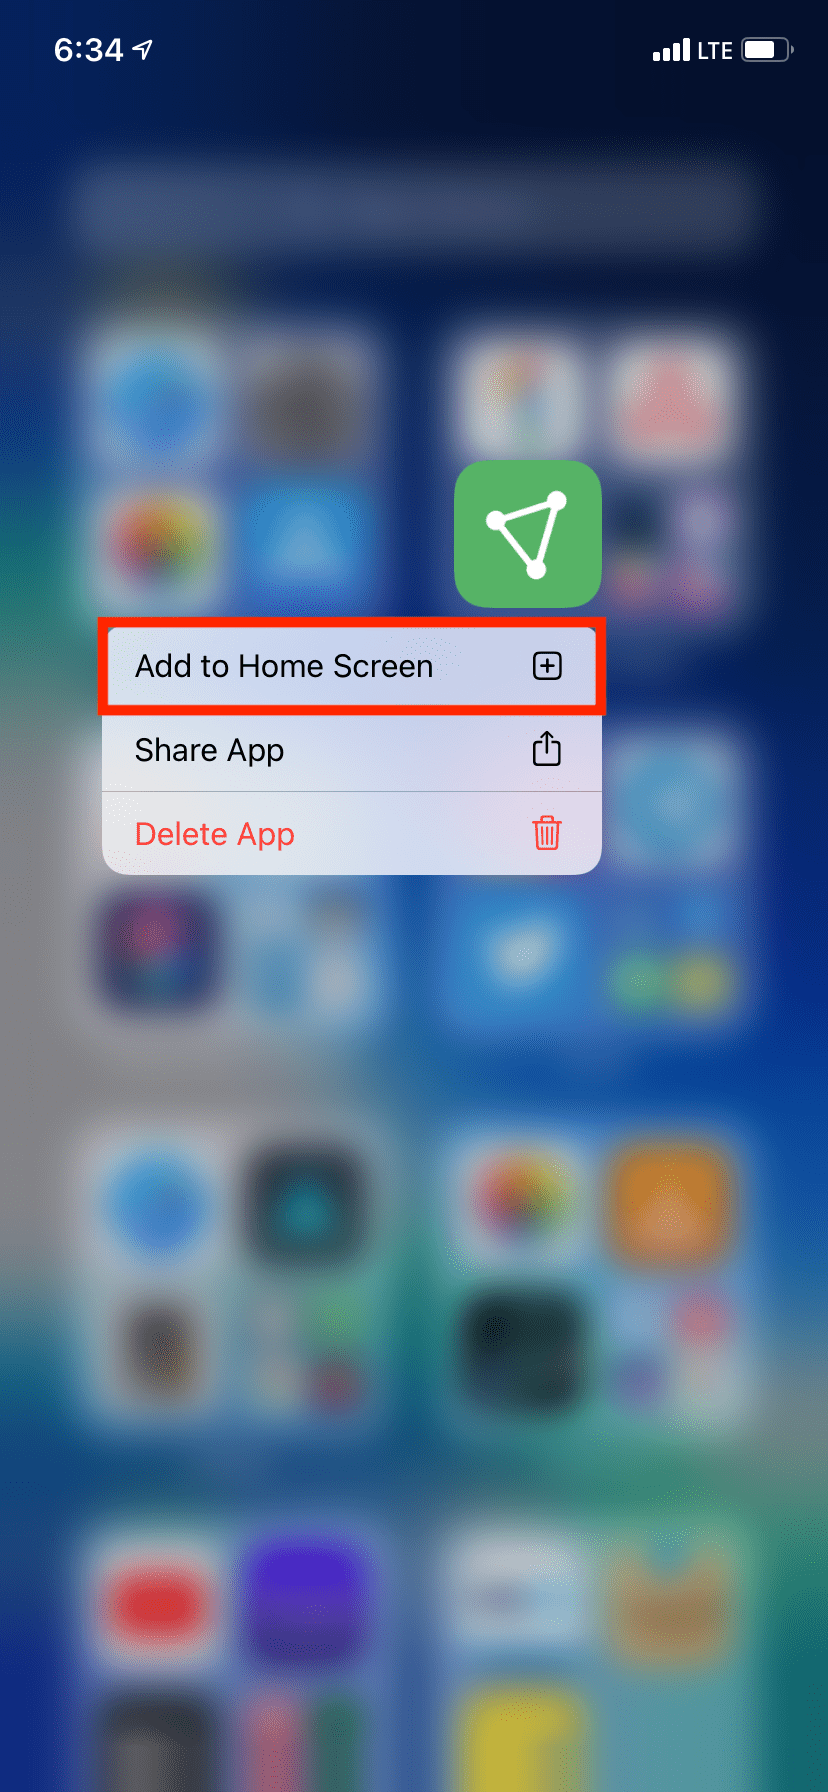 Long-press app in App Library and tap Add to Home Screen